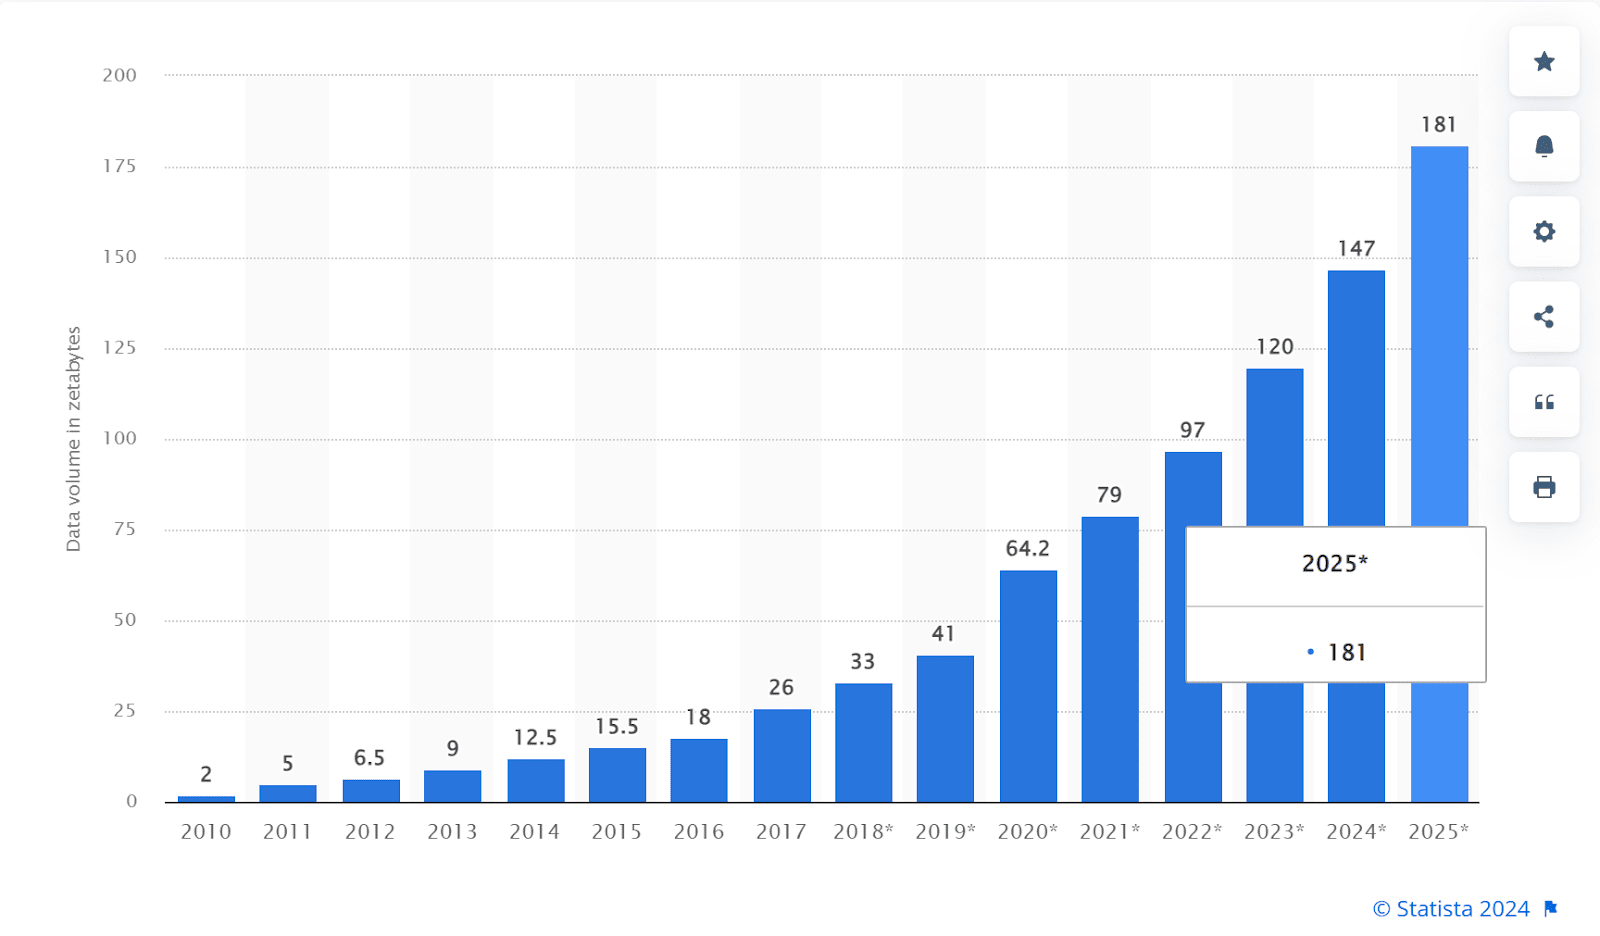 Statista's graph showing the projected data generated worldwide by 2025